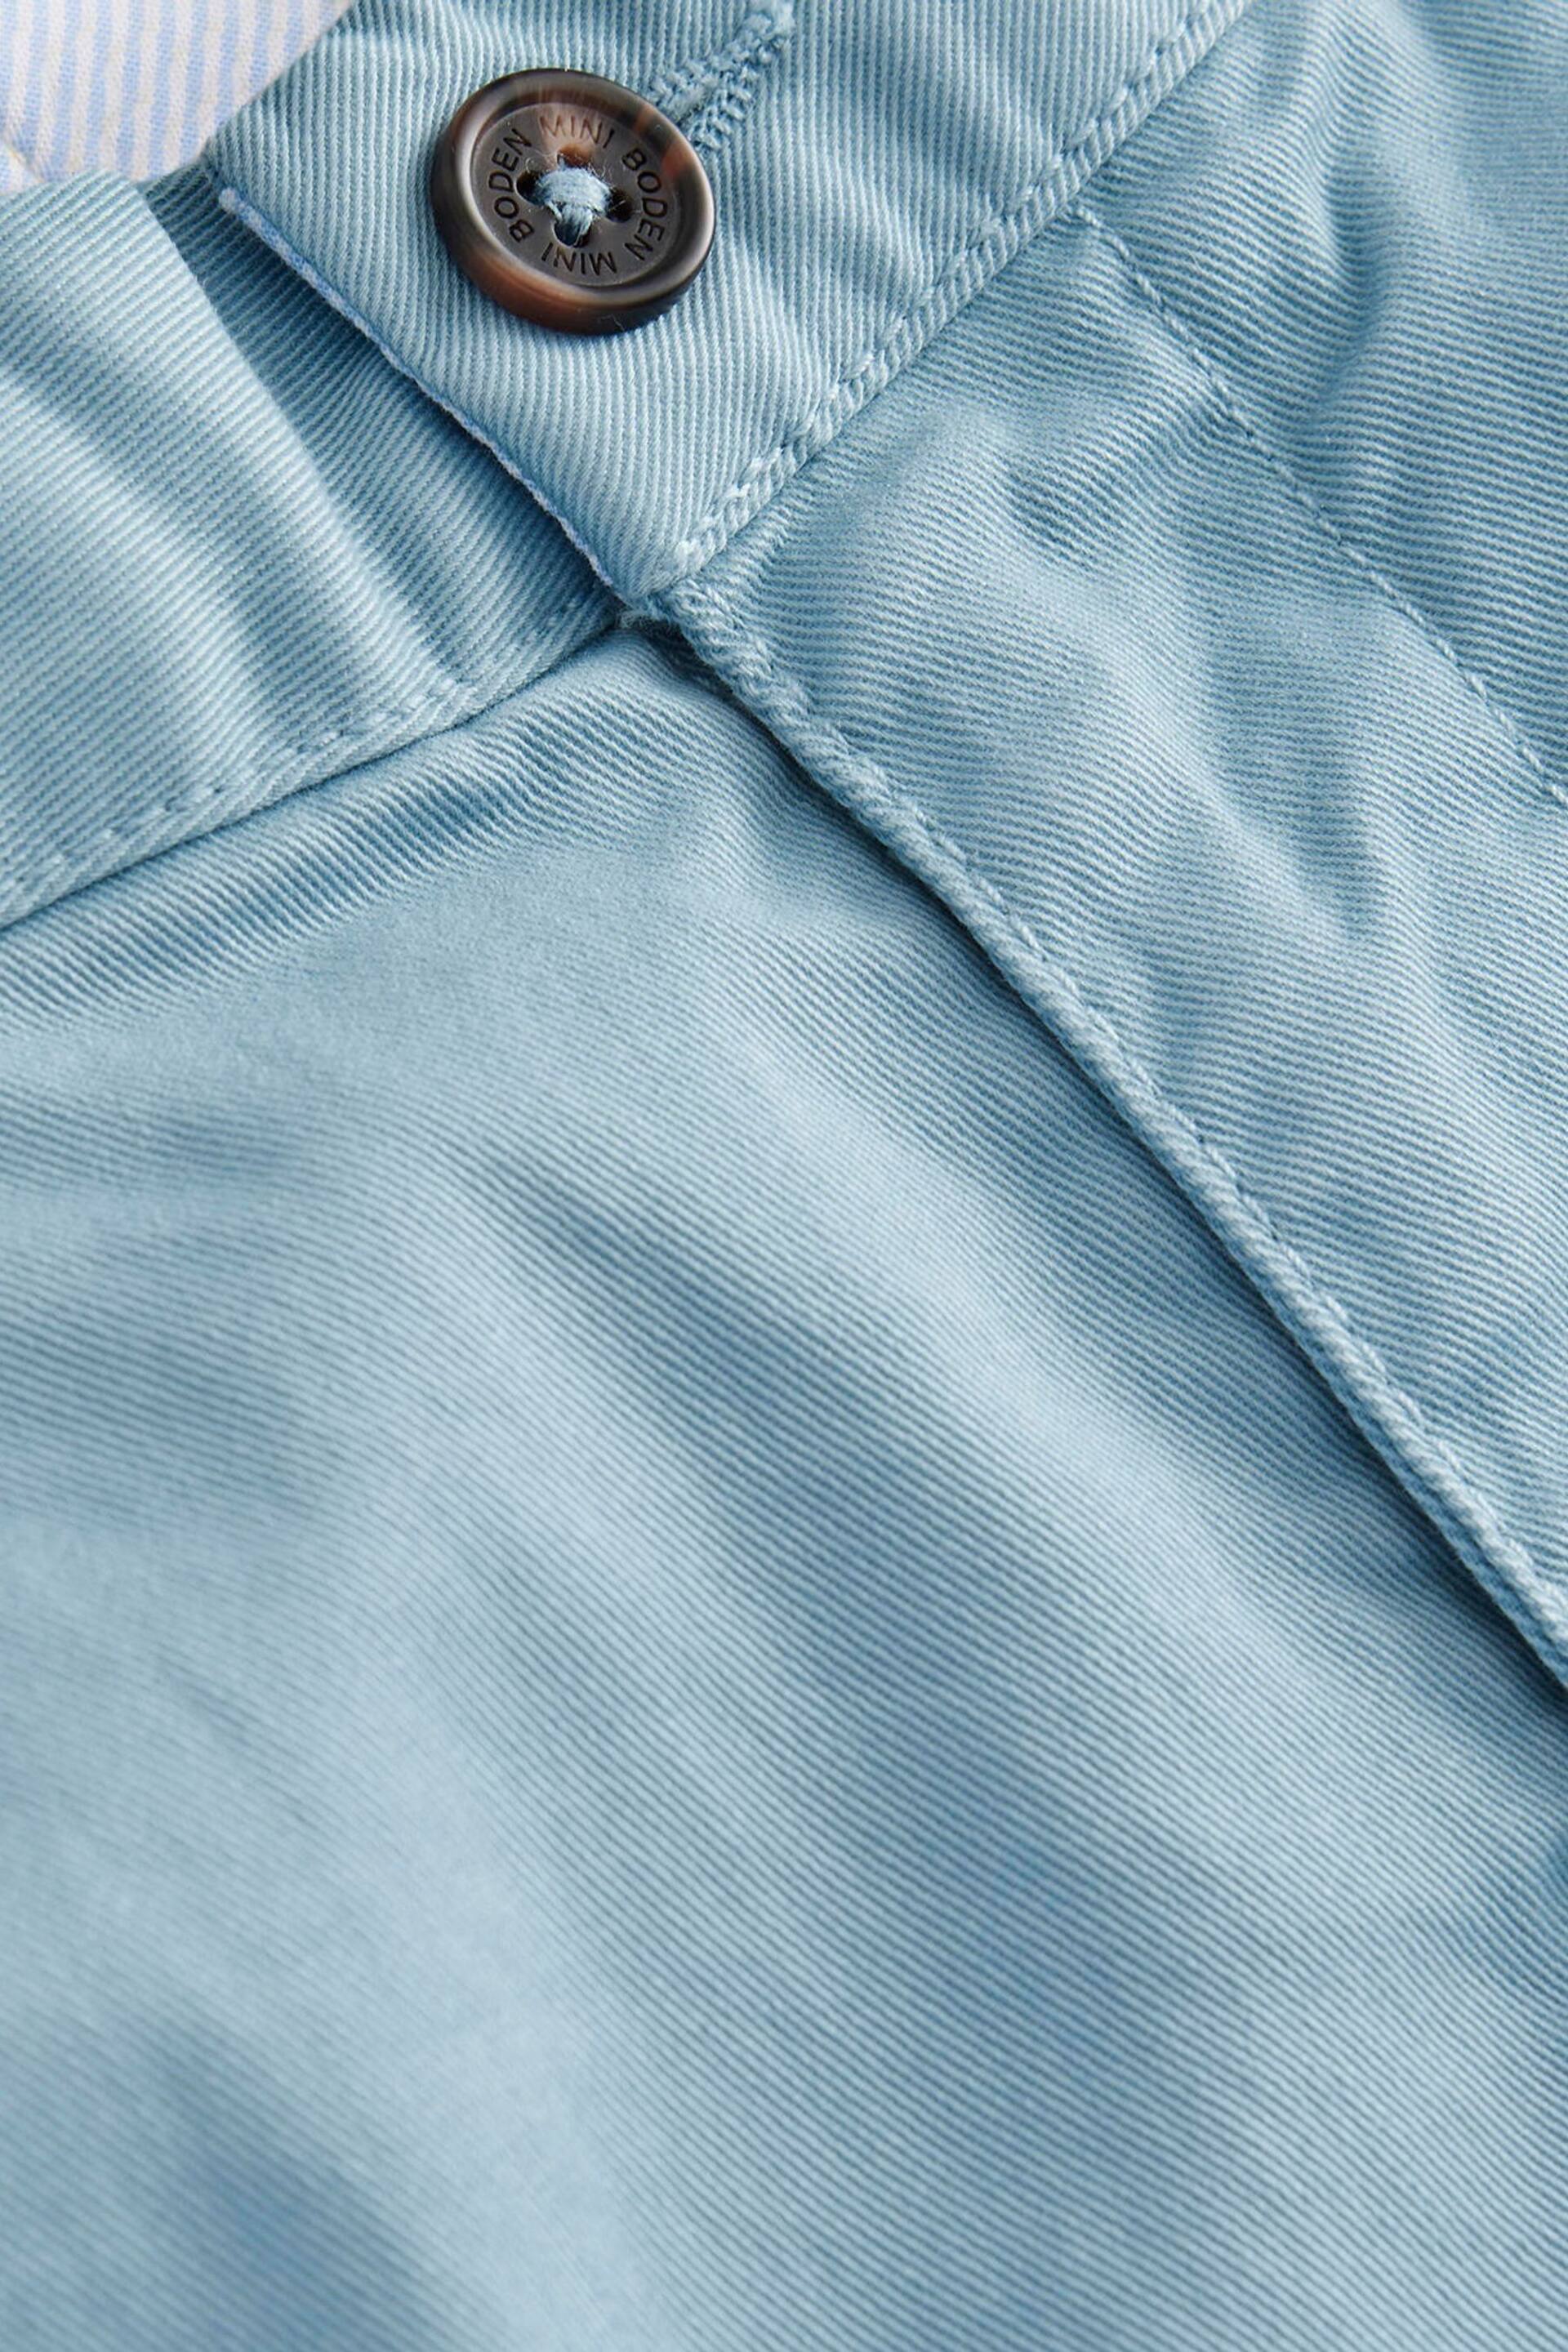 Boden Blue Classic Chino Shorts - Image 3 of 3